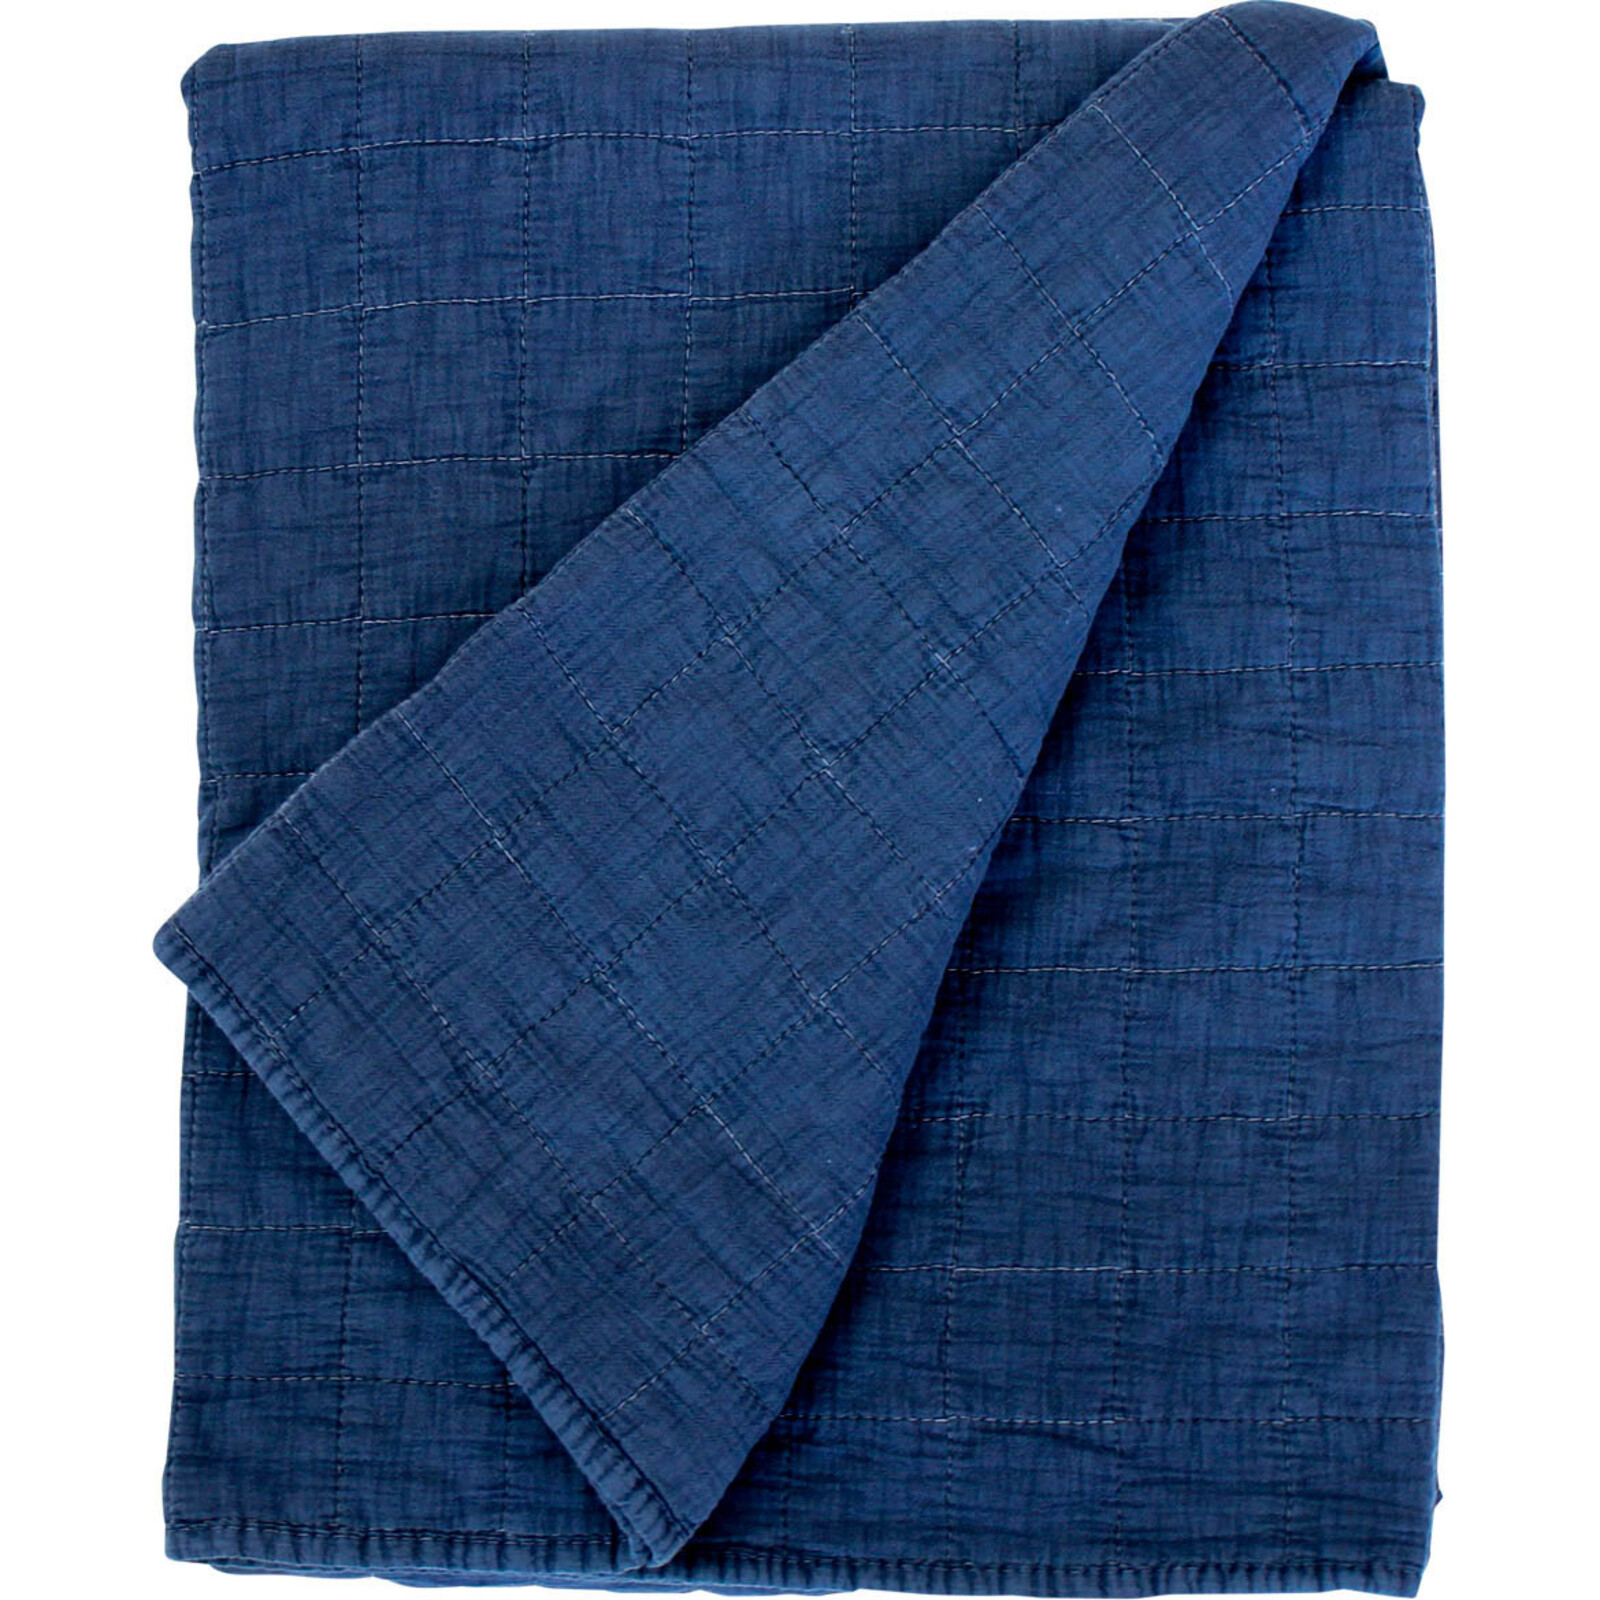 Throw Quilted Cotton Squares Navy